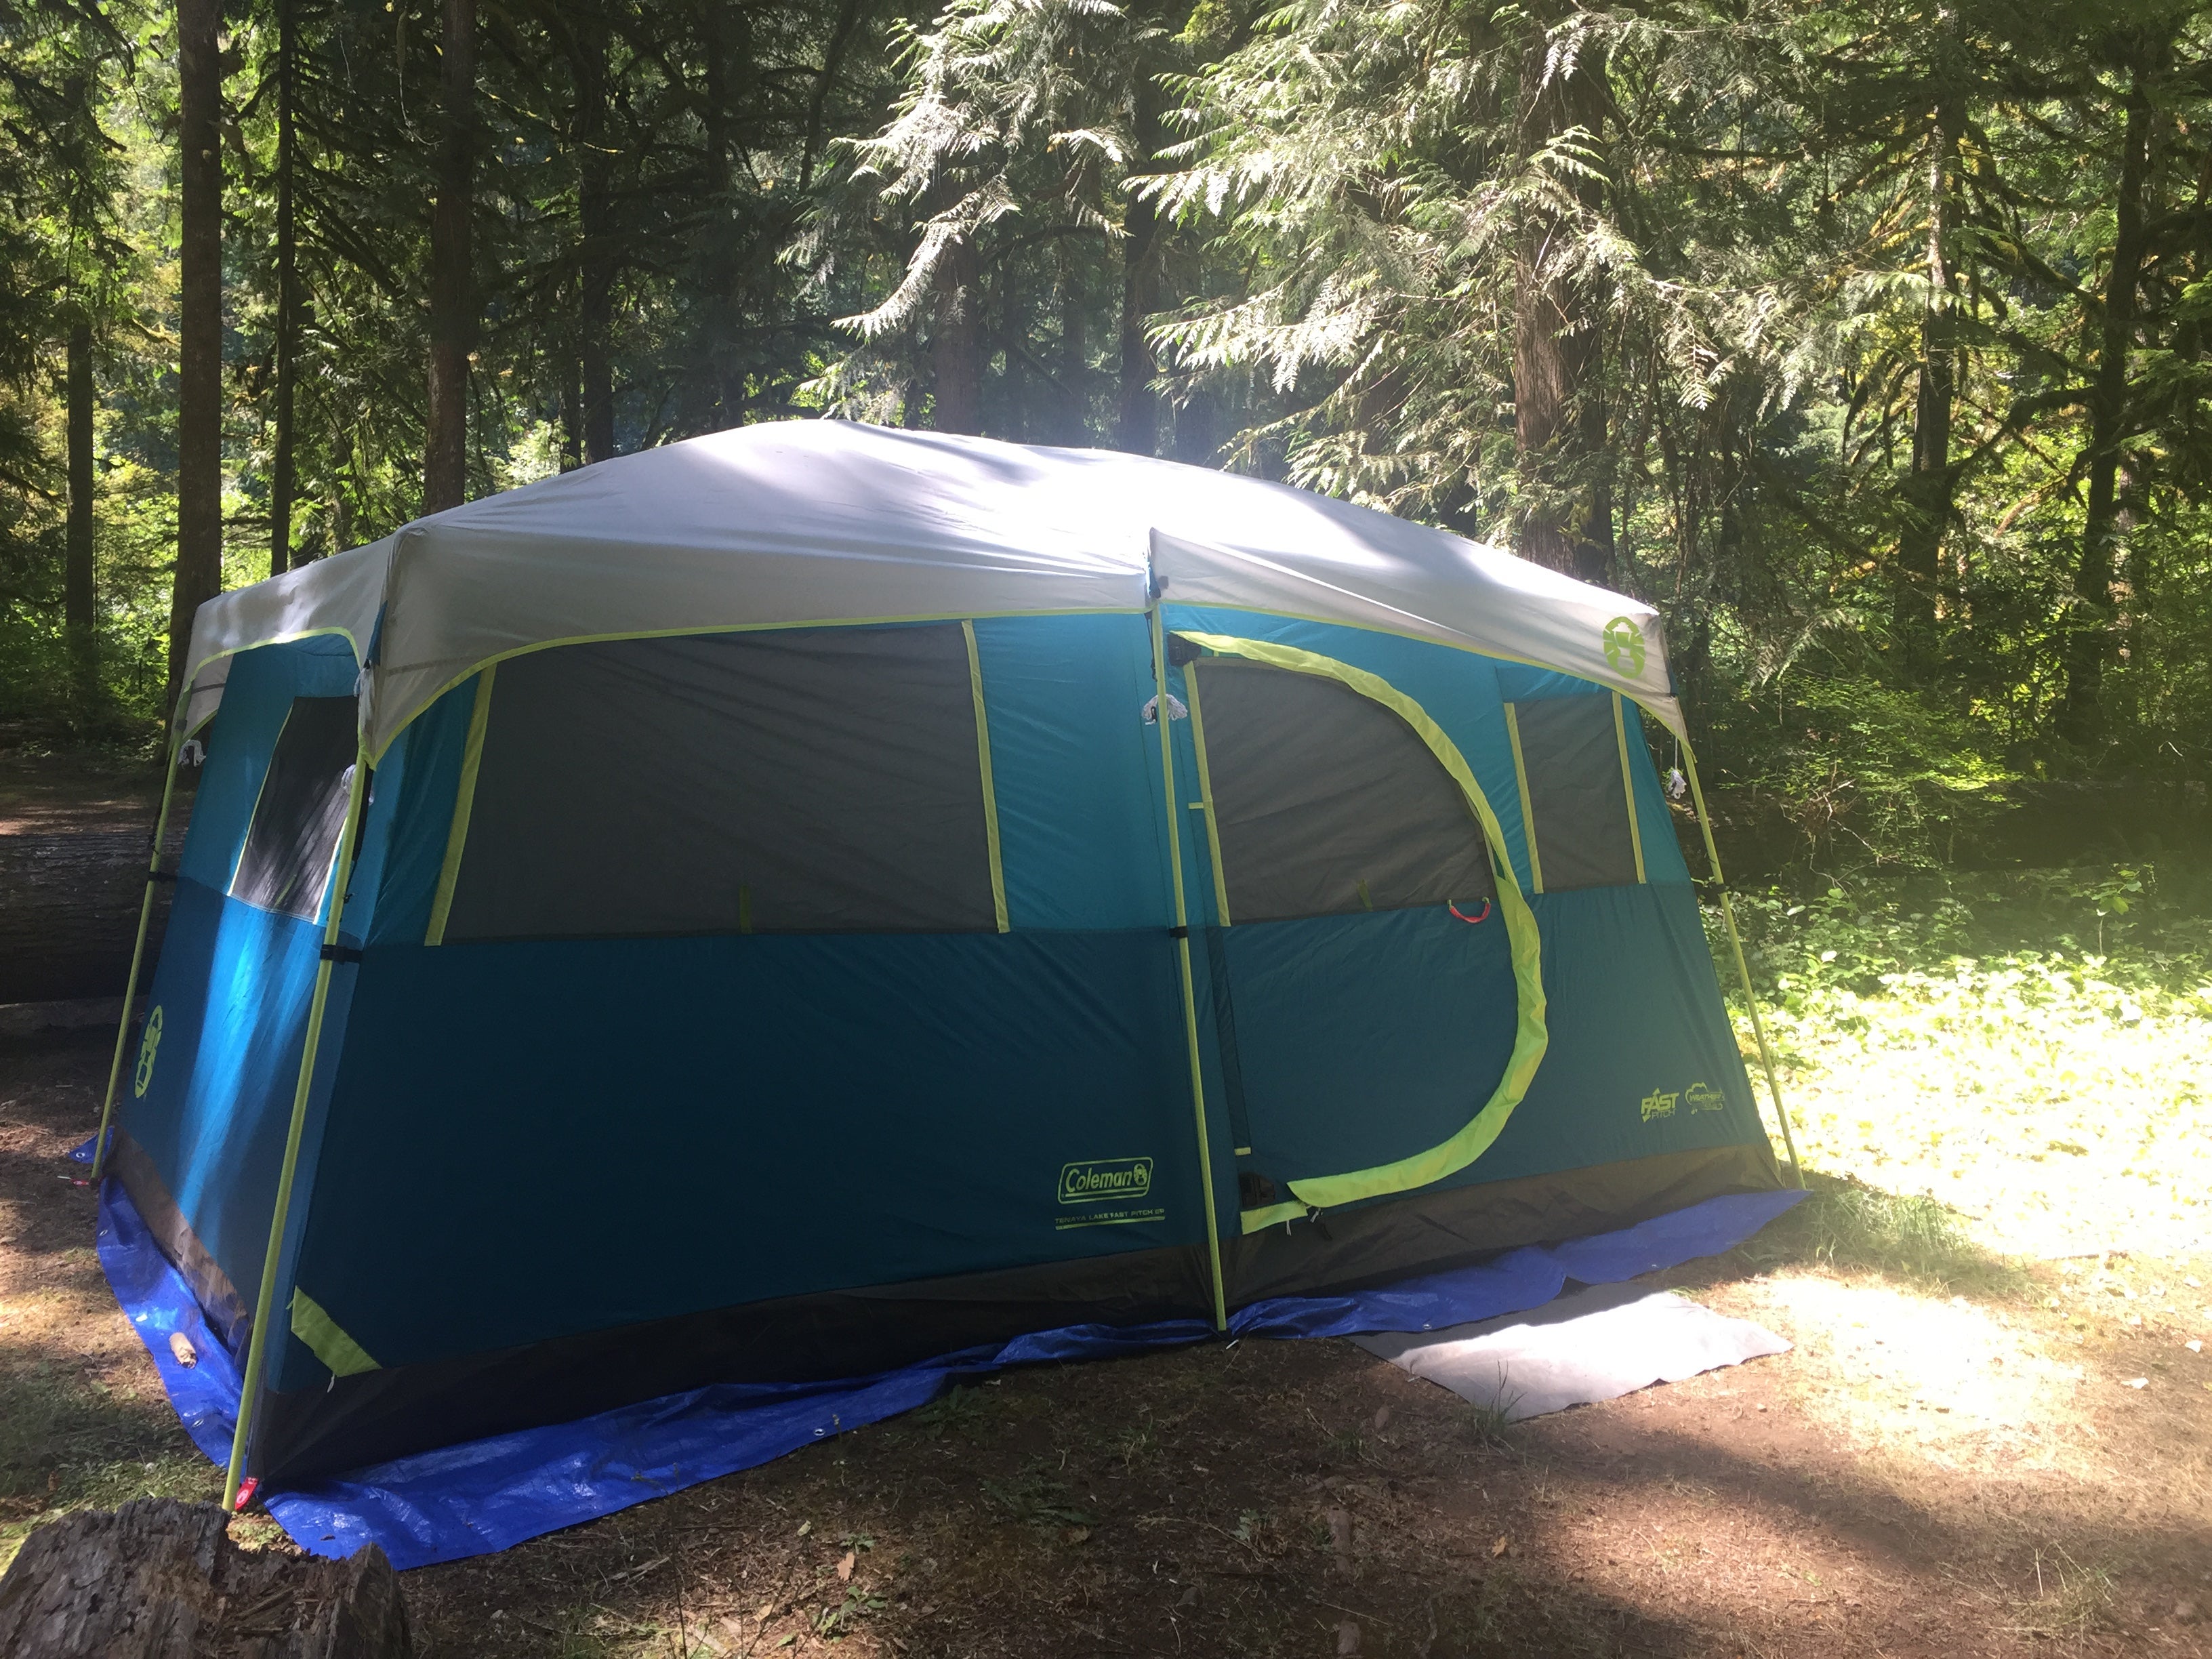 Large campsites with lots of space! This is our 8-person tent set up.